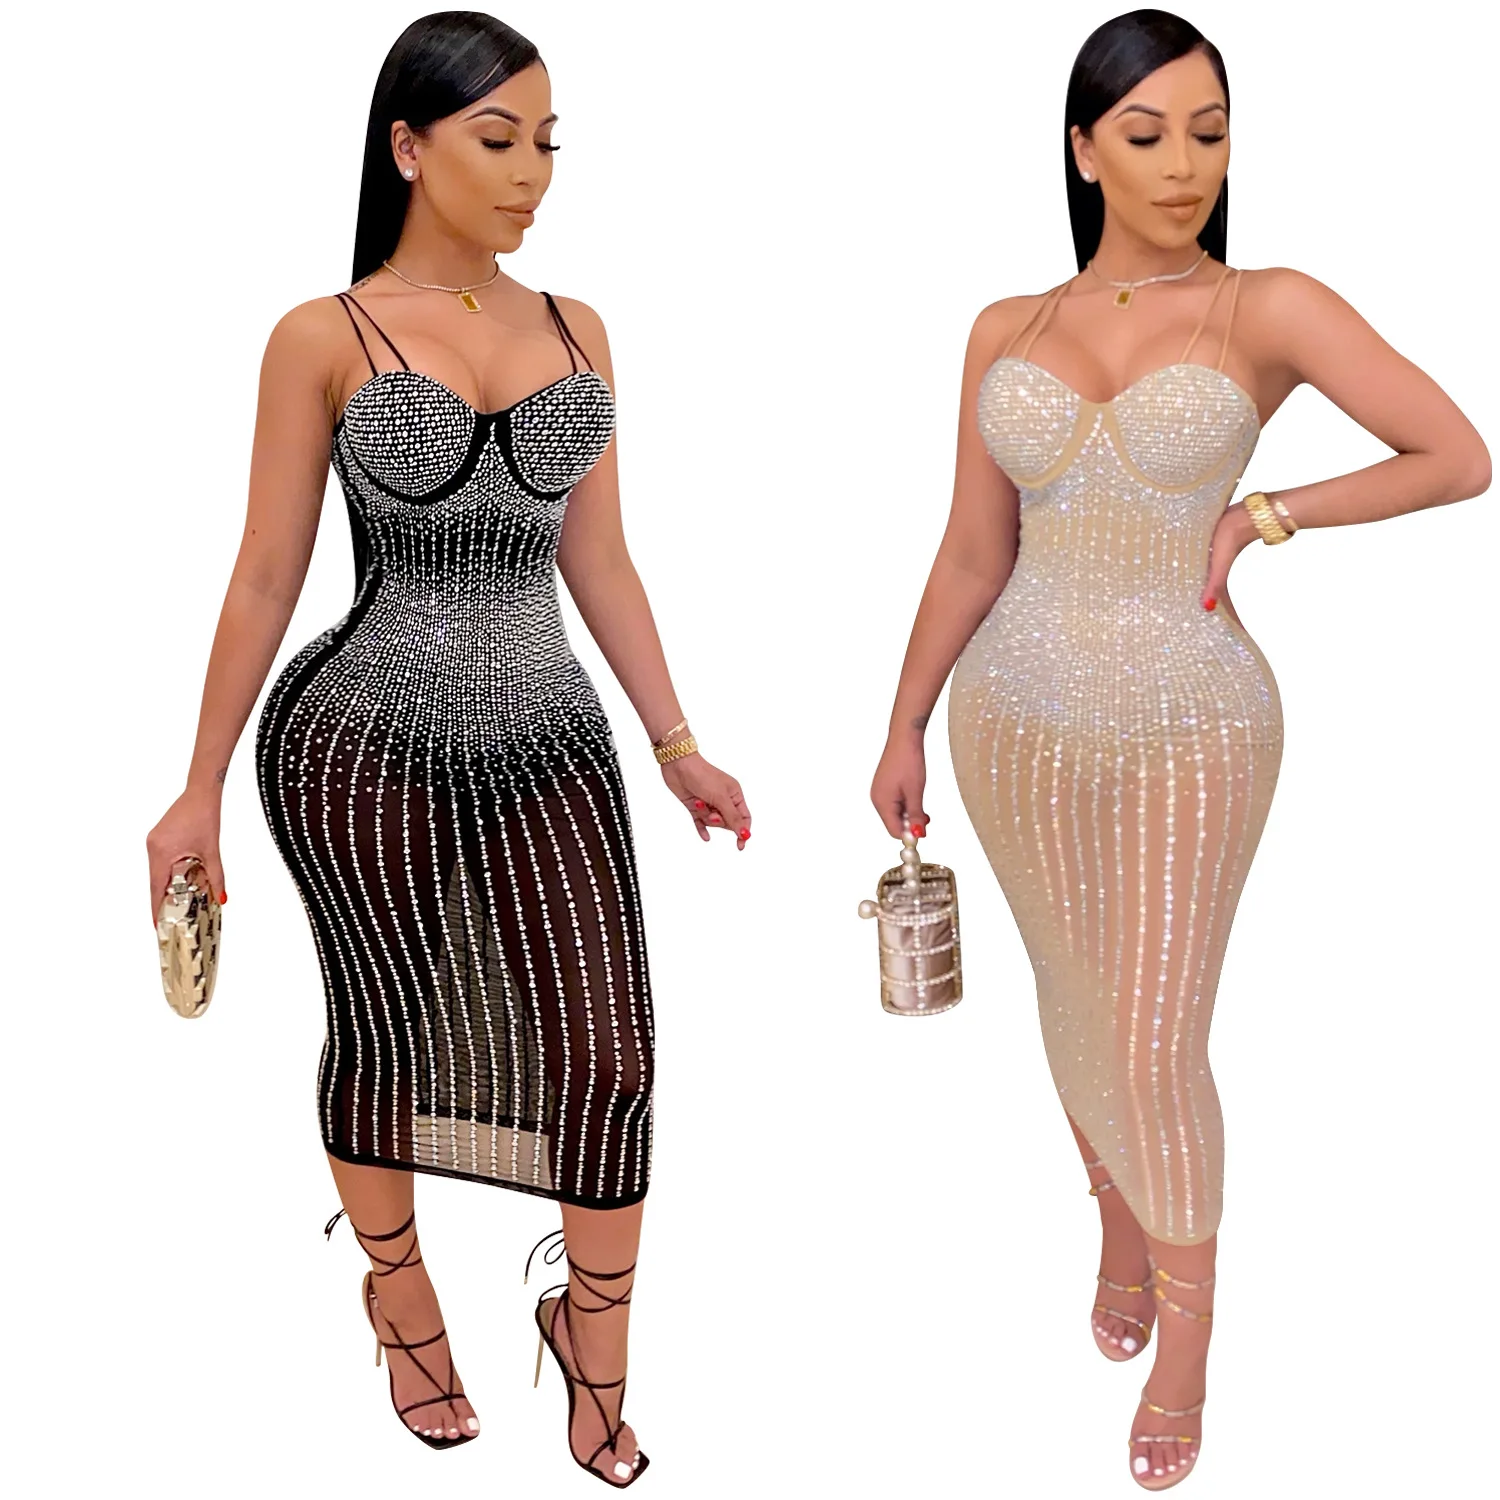 

2021 New Arrivals Ladies Party nightclub mesh perspective ironing set diamond condole sexy casual dress clubwear, 2 colors as picture